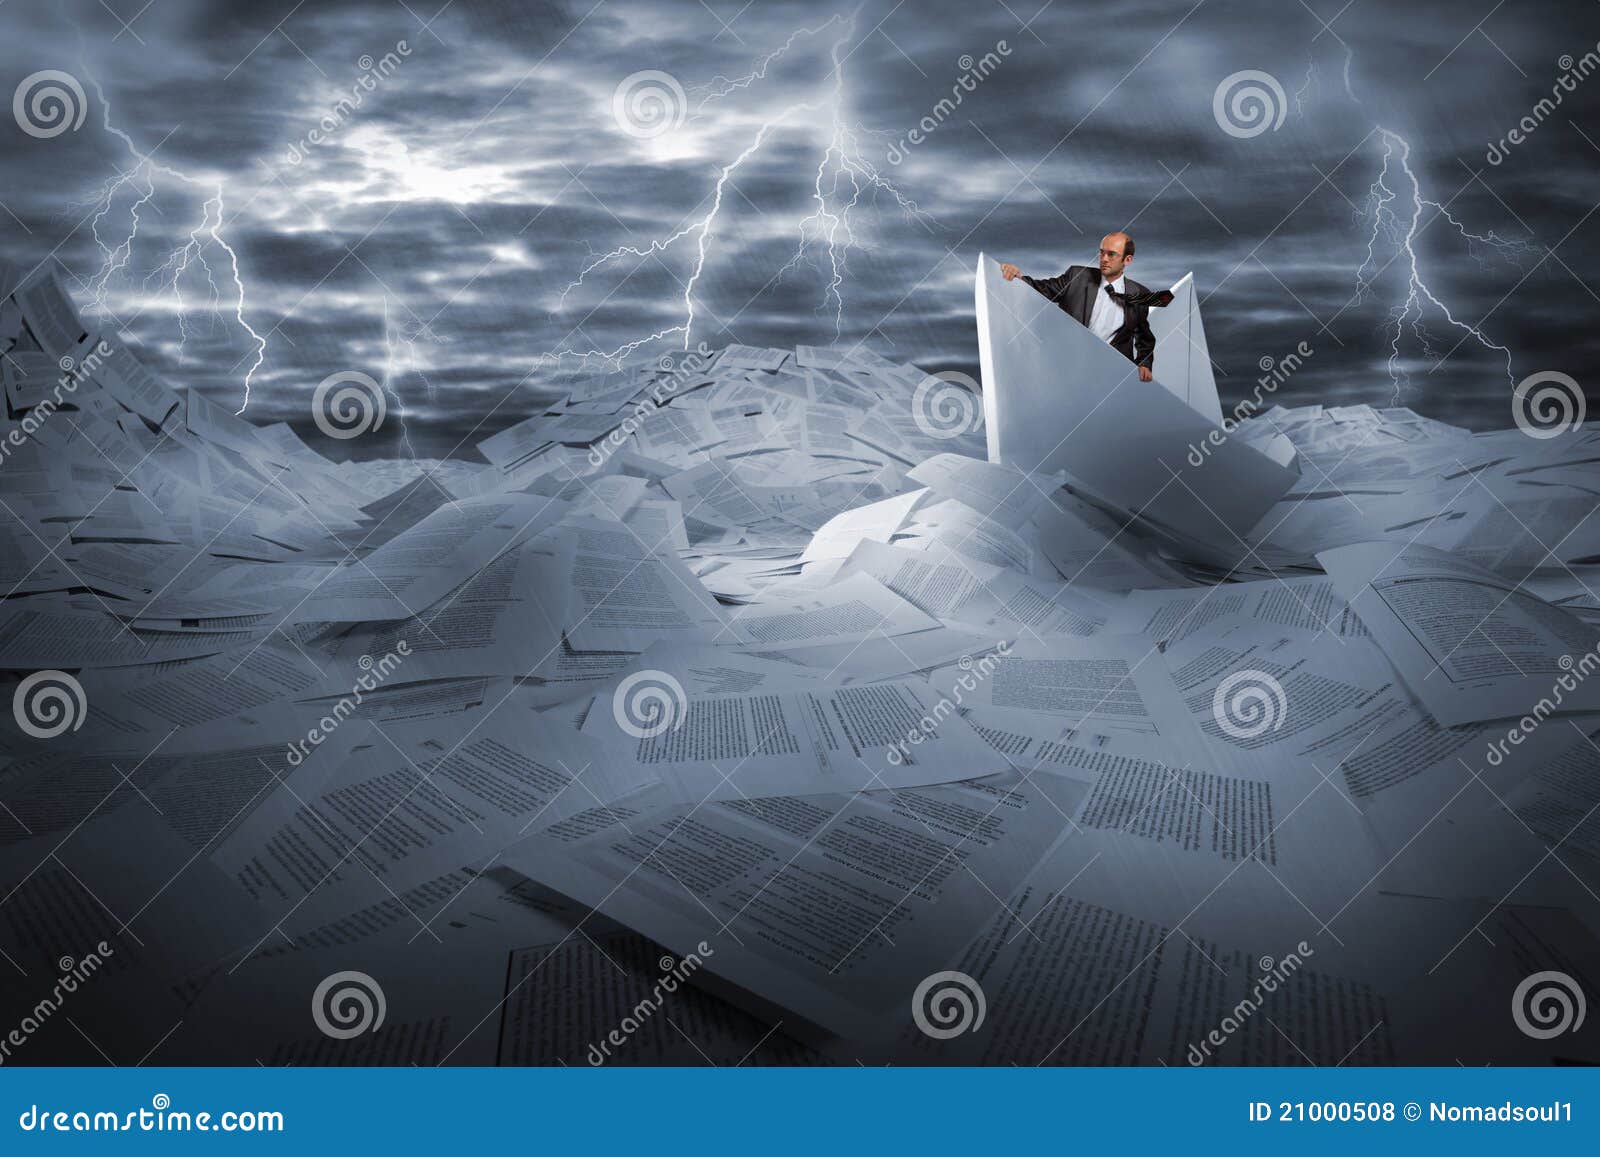 businessman sailing in stormy papers sea